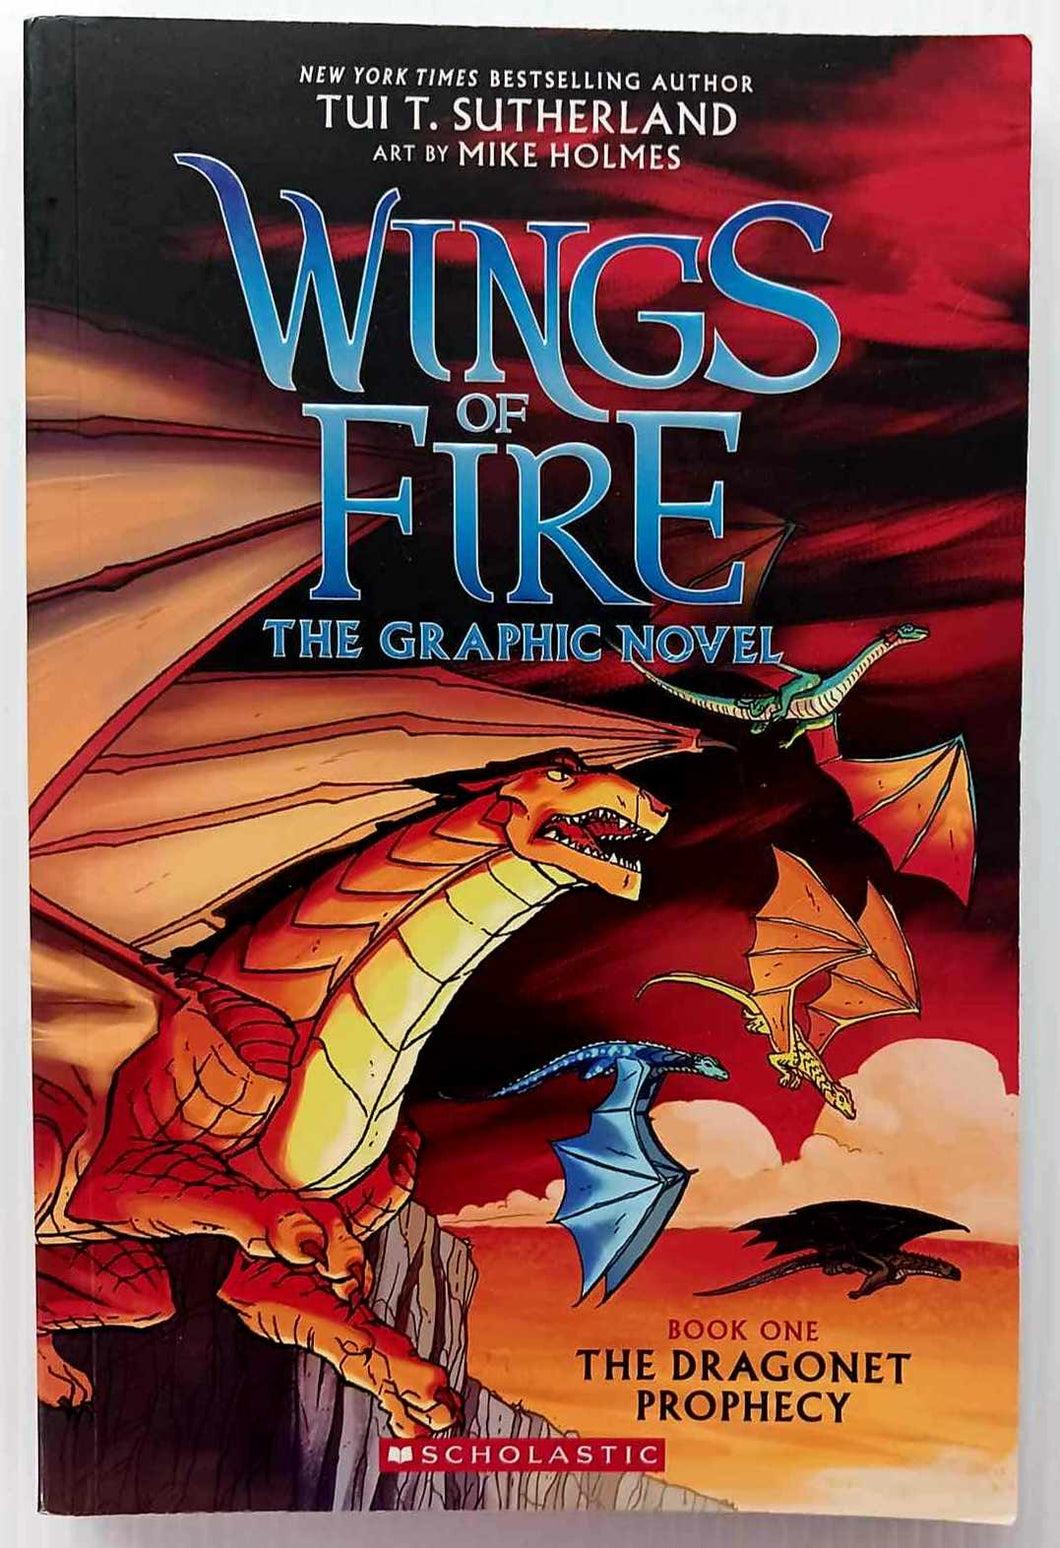 WINGS OF FIRE THE GRAPHIC NOVEL - Tui T. Sutherland